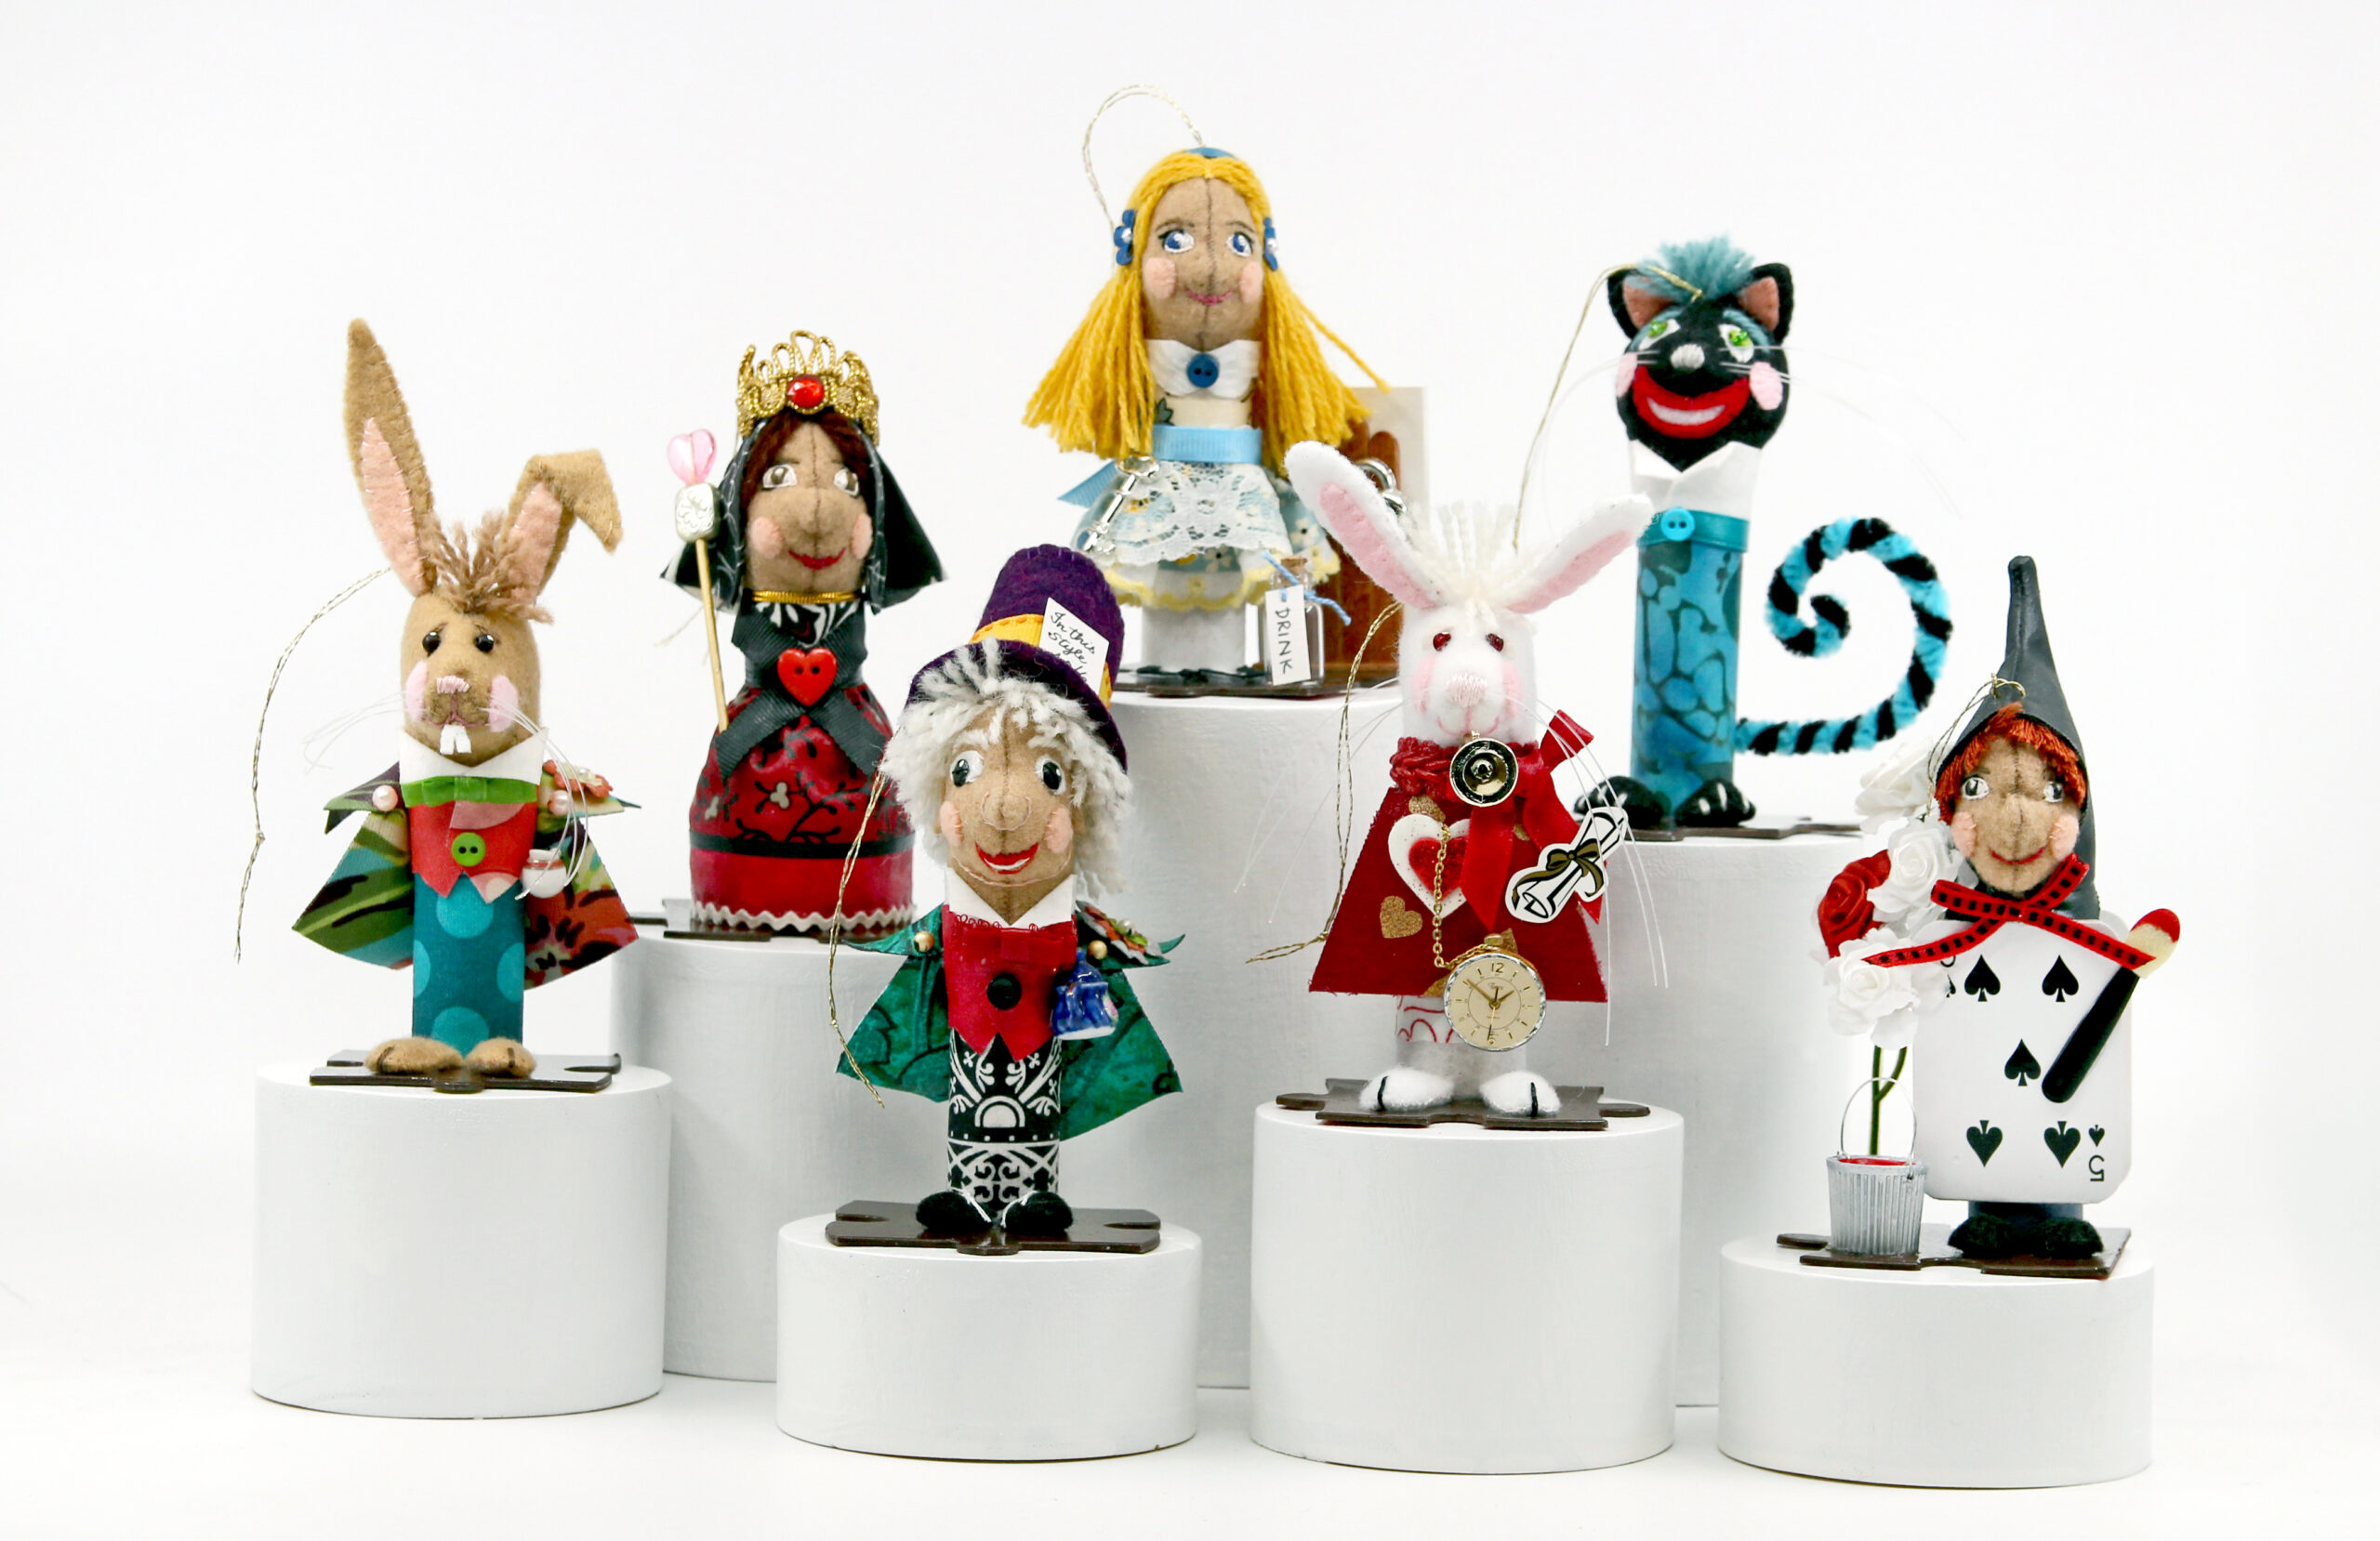 Alice in Wonderland Handcrafted Ornaments Collection